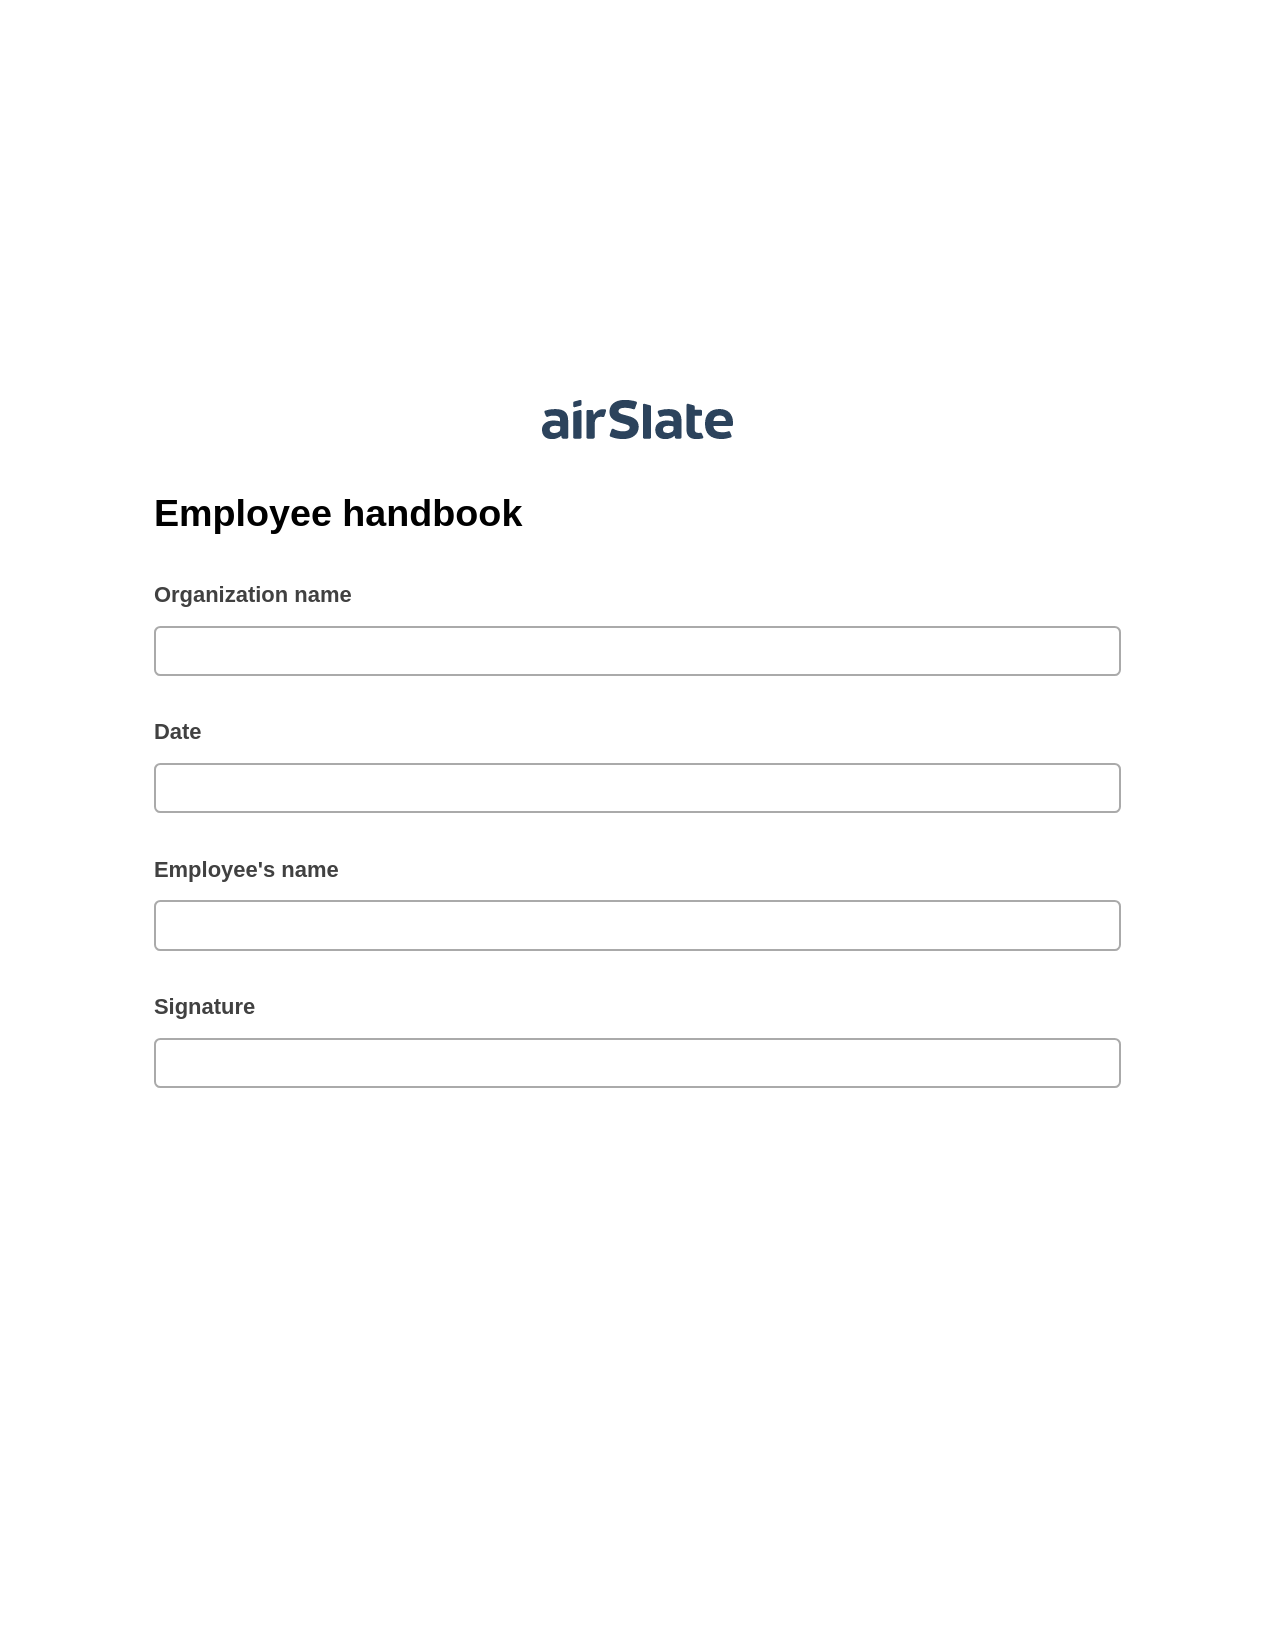 Multirole Employee handbook Pre-fill from Salesforce Record Bot, Lock the slate bot, Export to Excel 365 Bot